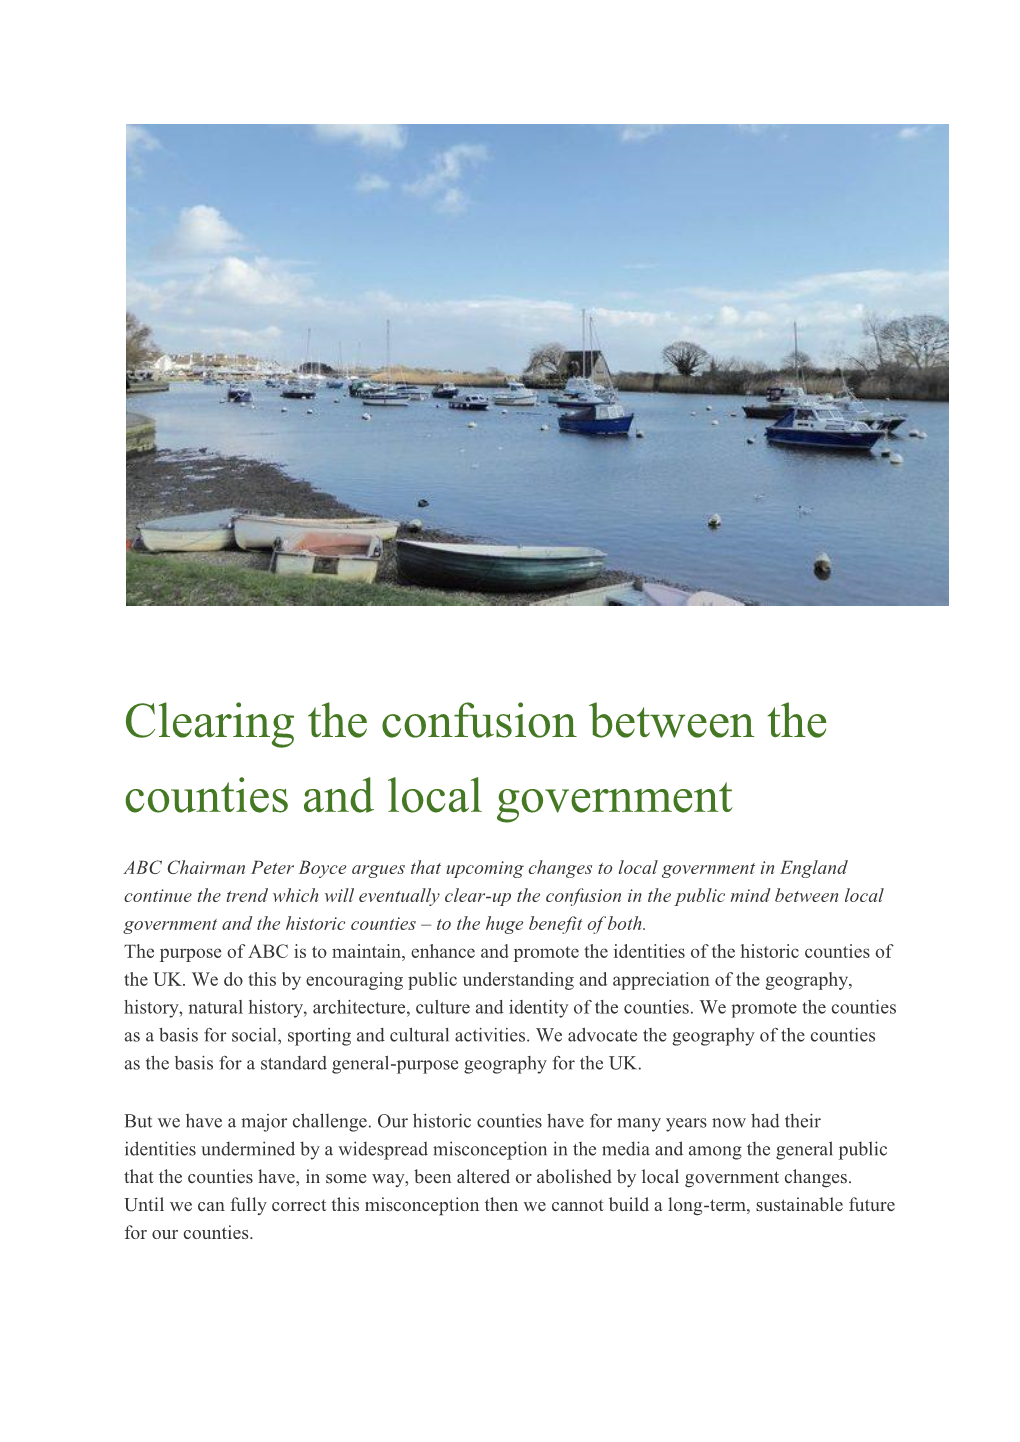 Clearing the Confusion Between the Counties and Local Government